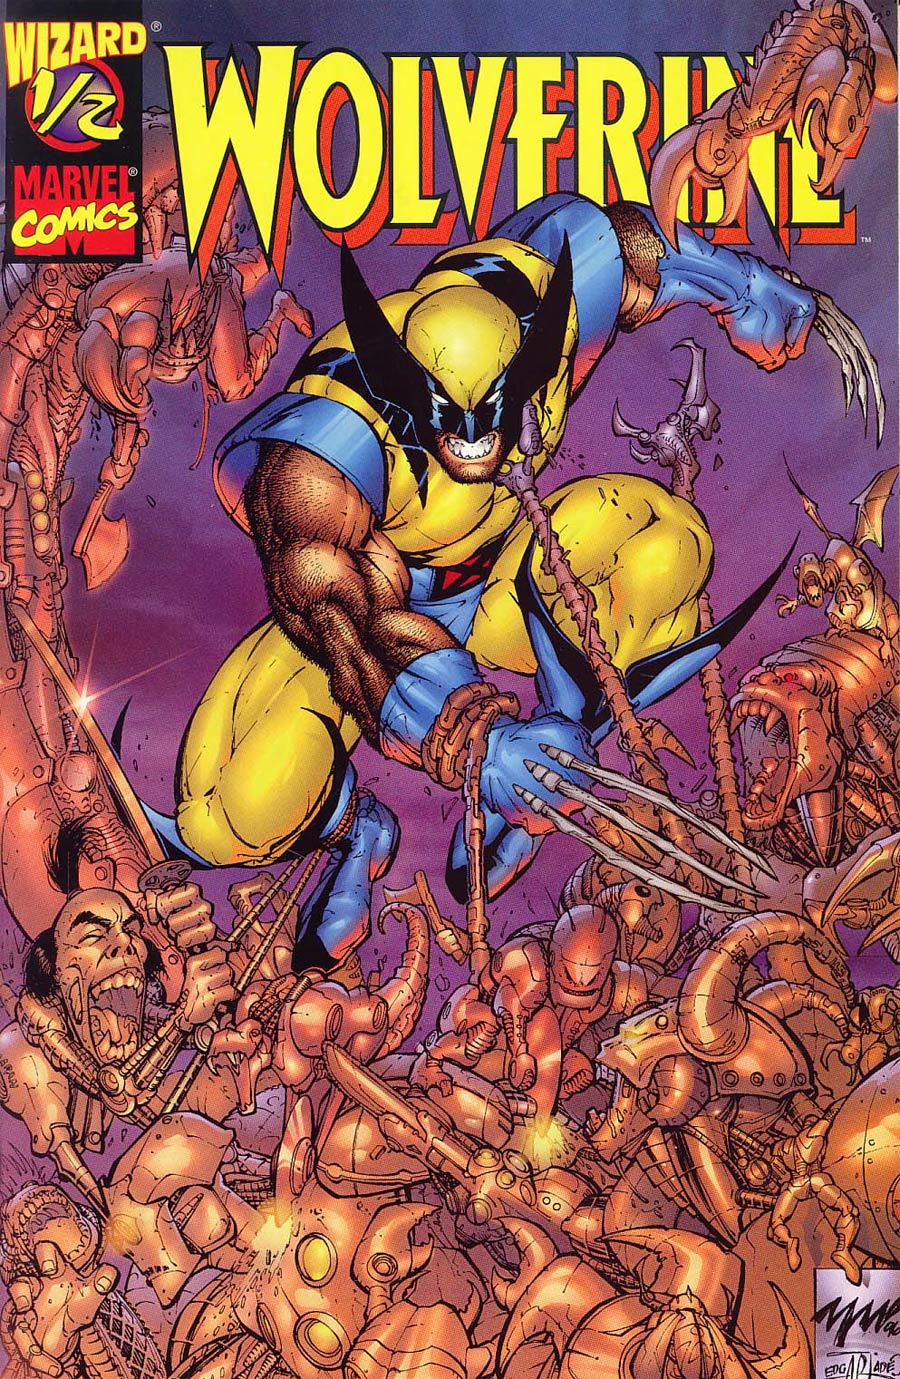 Wolverine Wizard #1/2 Cover A